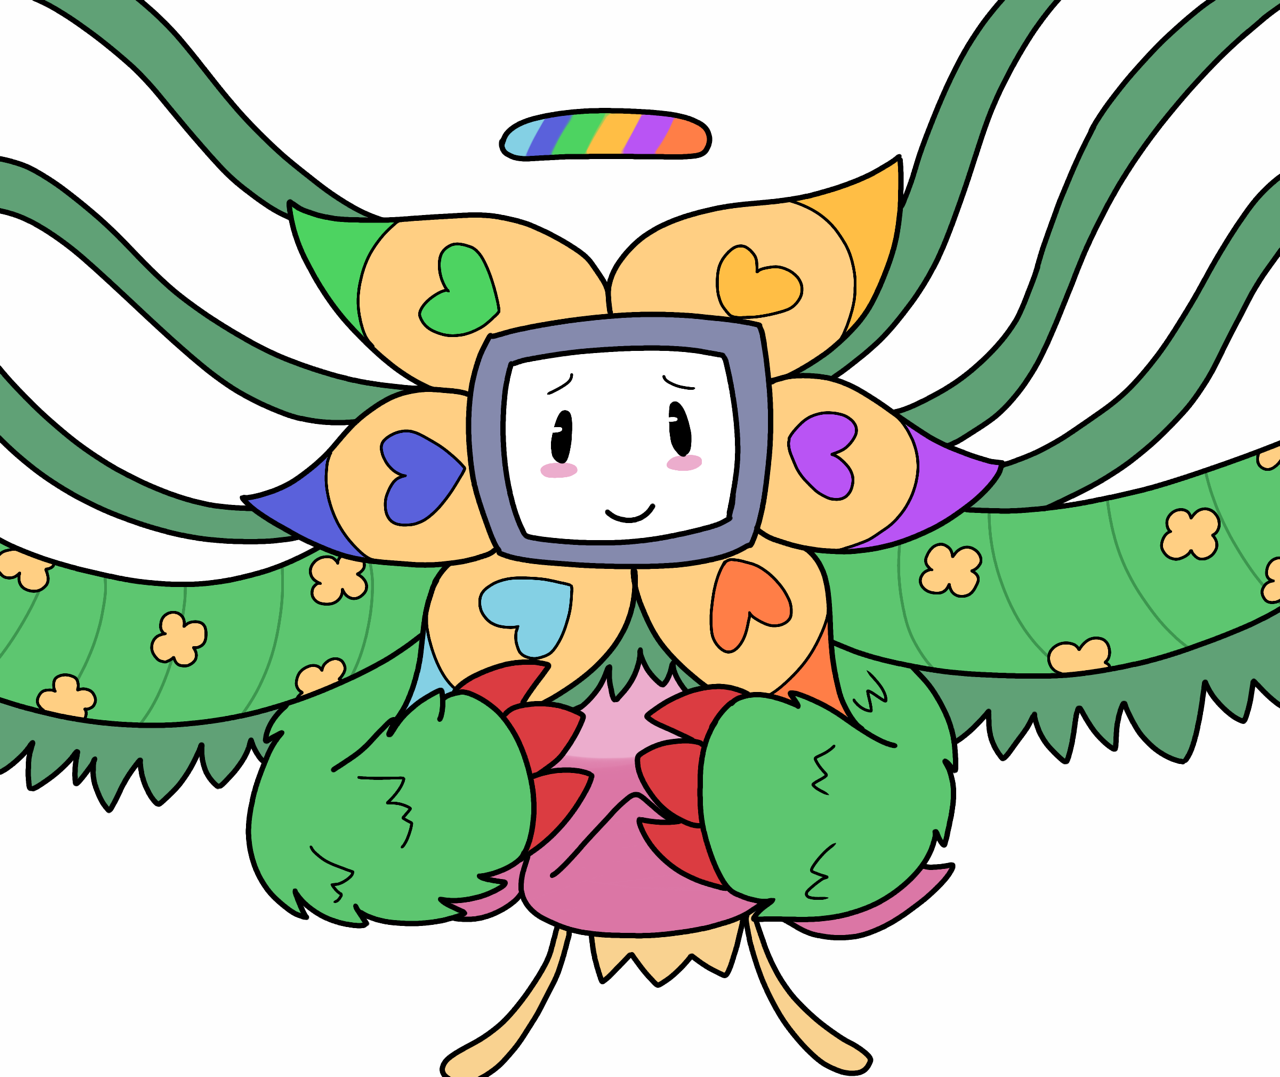 Alpha Flowey Explore Tumblr Posts And Blogs Tumgir I may be adding updates every now and then, but for now it will be like this. alpha flowey explore tumblr posts and